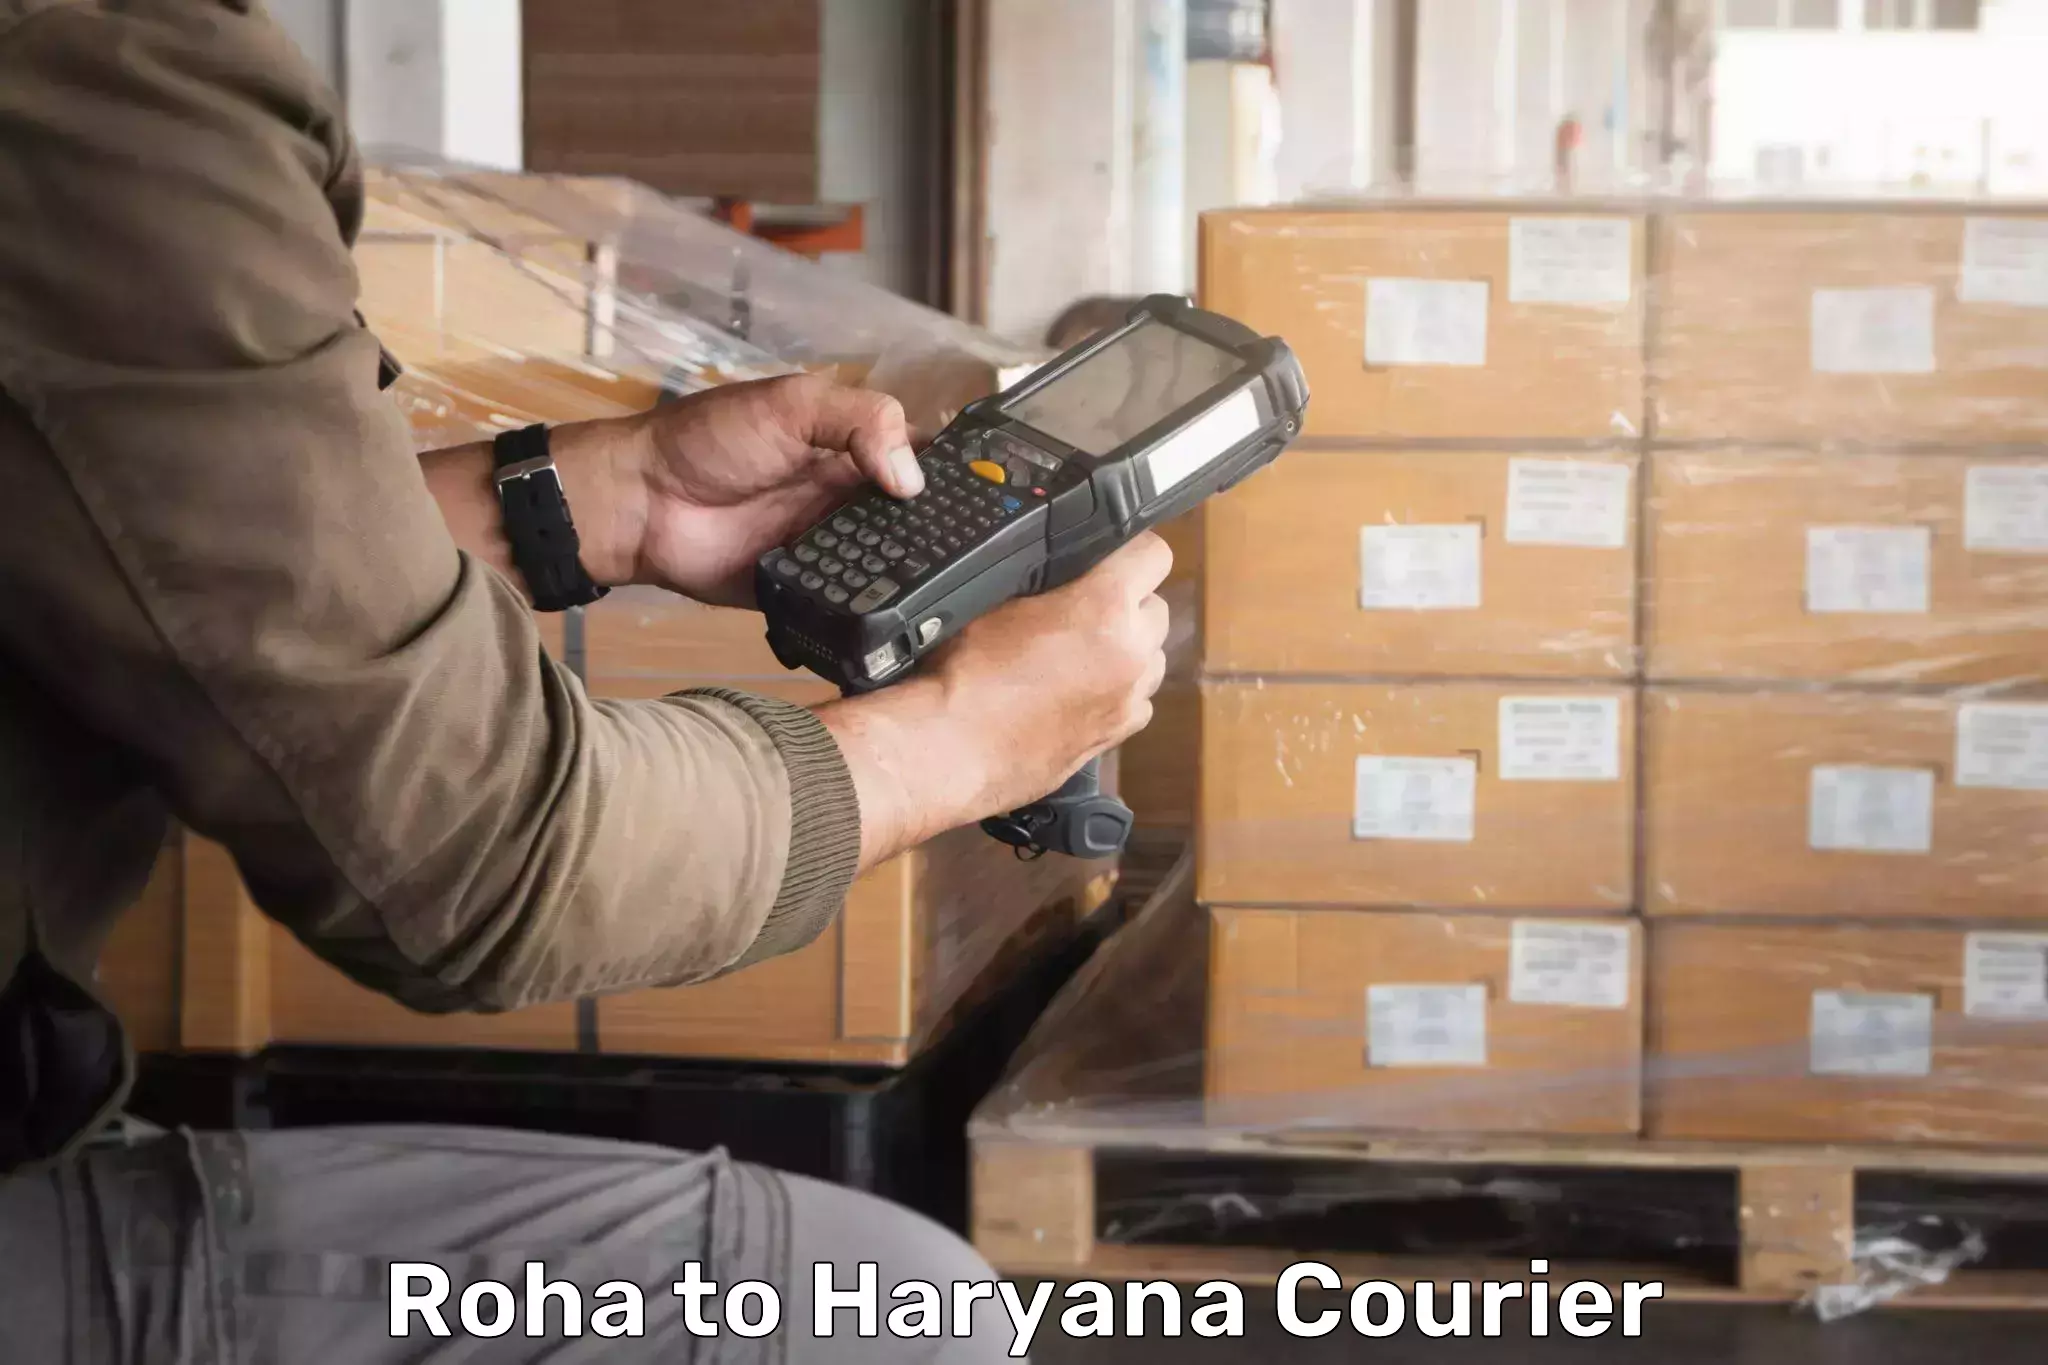 Modern delivery methods Roha to Gurgaon